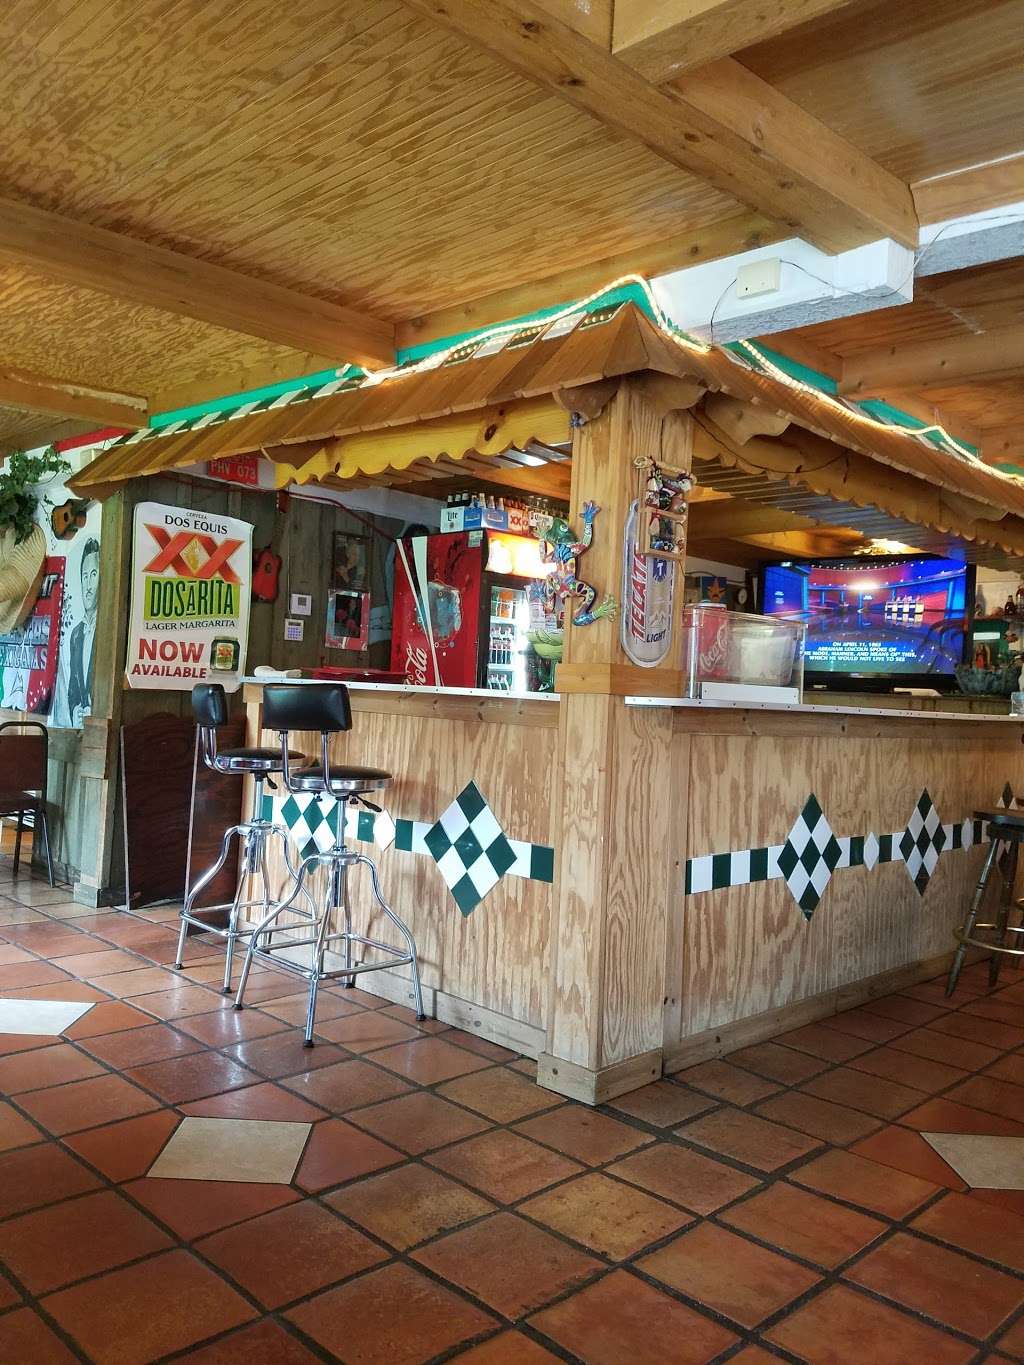 Anthonys Mexican Restaurant | 941 Grand Ave, Bacliff, TX 77518, USA | Phone: (281) 559-2495